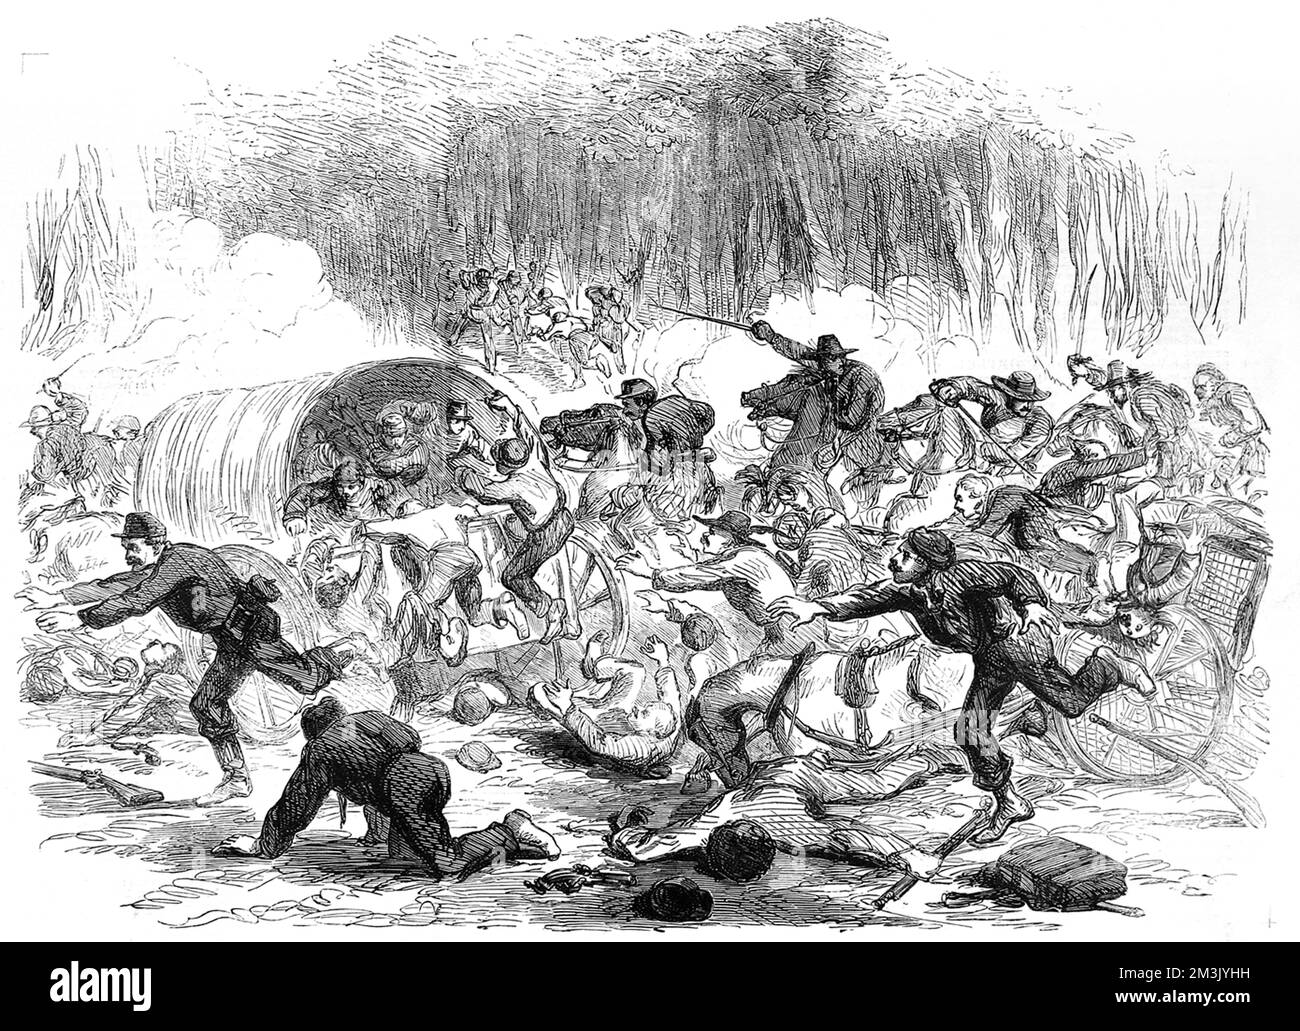 The end of the first Battle of Bull Run, showing Unionists retreating after losing the battle, which took place on July 21st 1869.     Date: 1861 Stock Photo